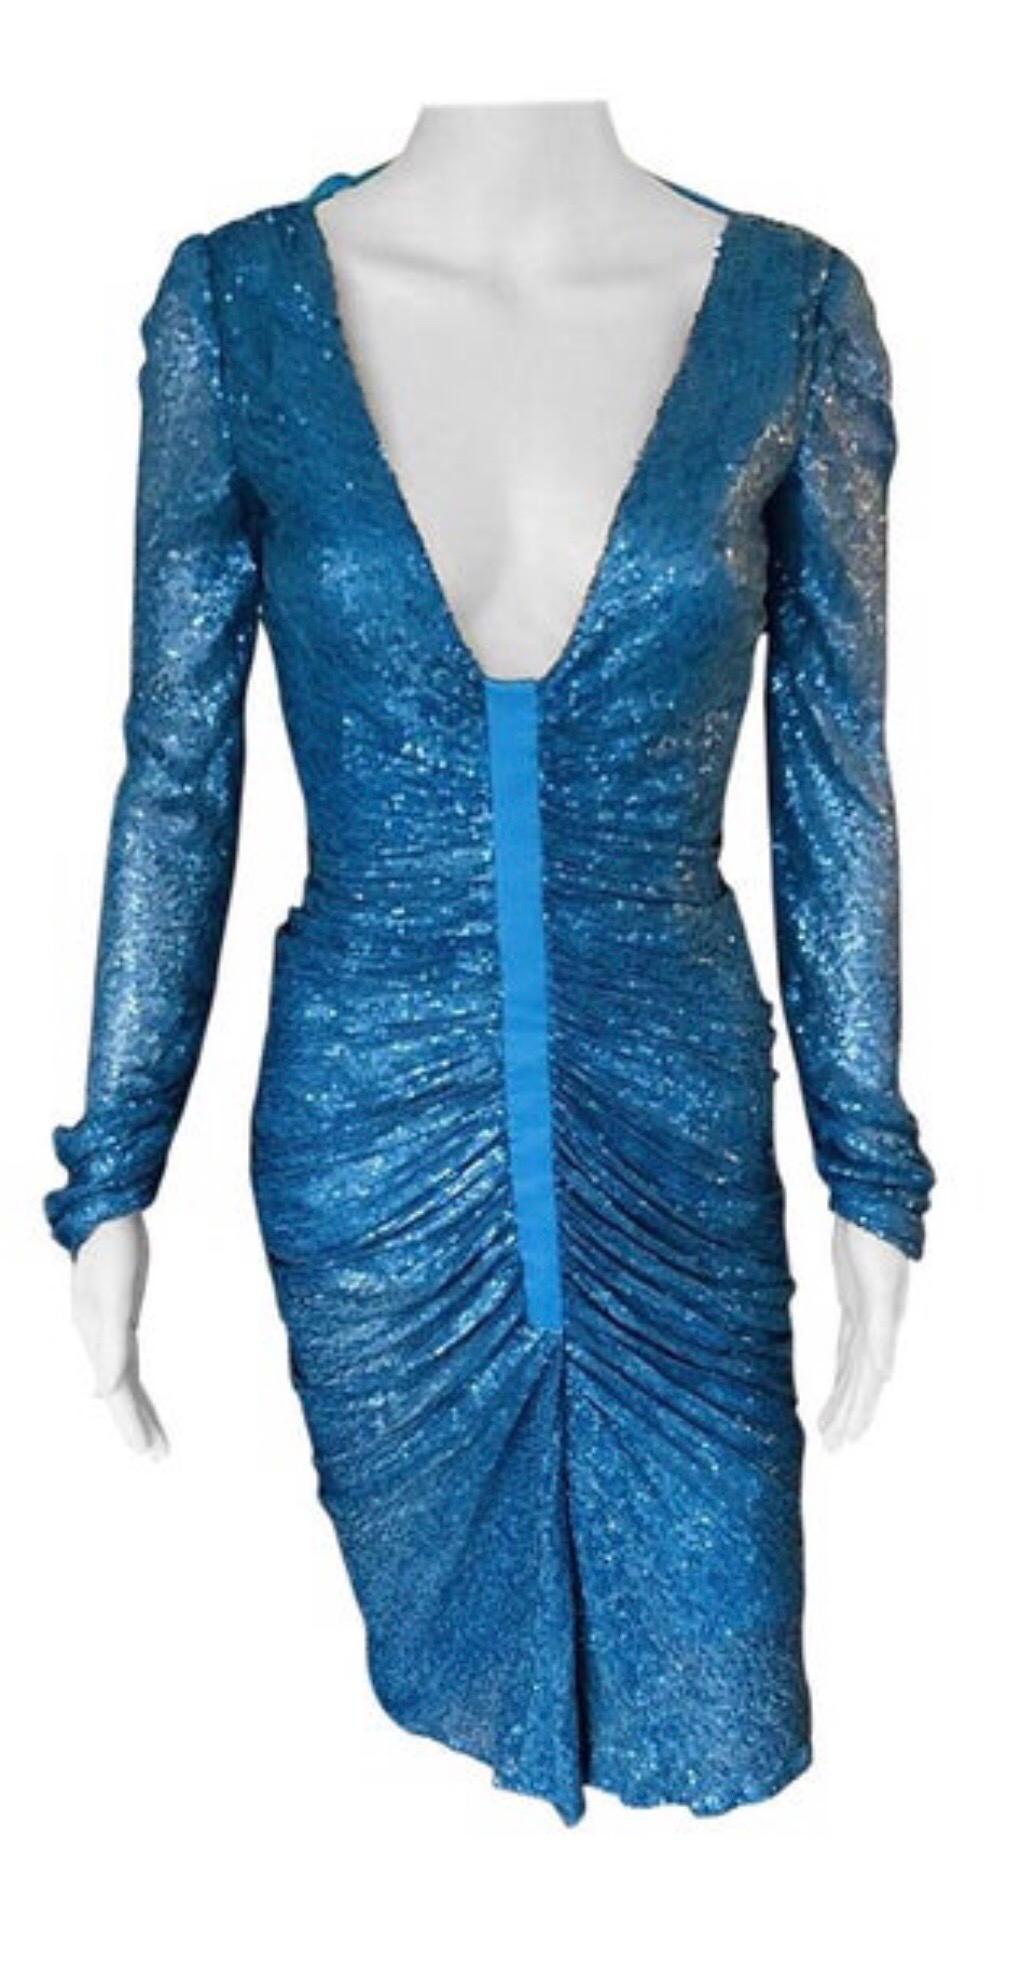 Women's Gianni Versace S/S 2001 Runway Blue Sequin Embellished Cutout Back Dress Gown